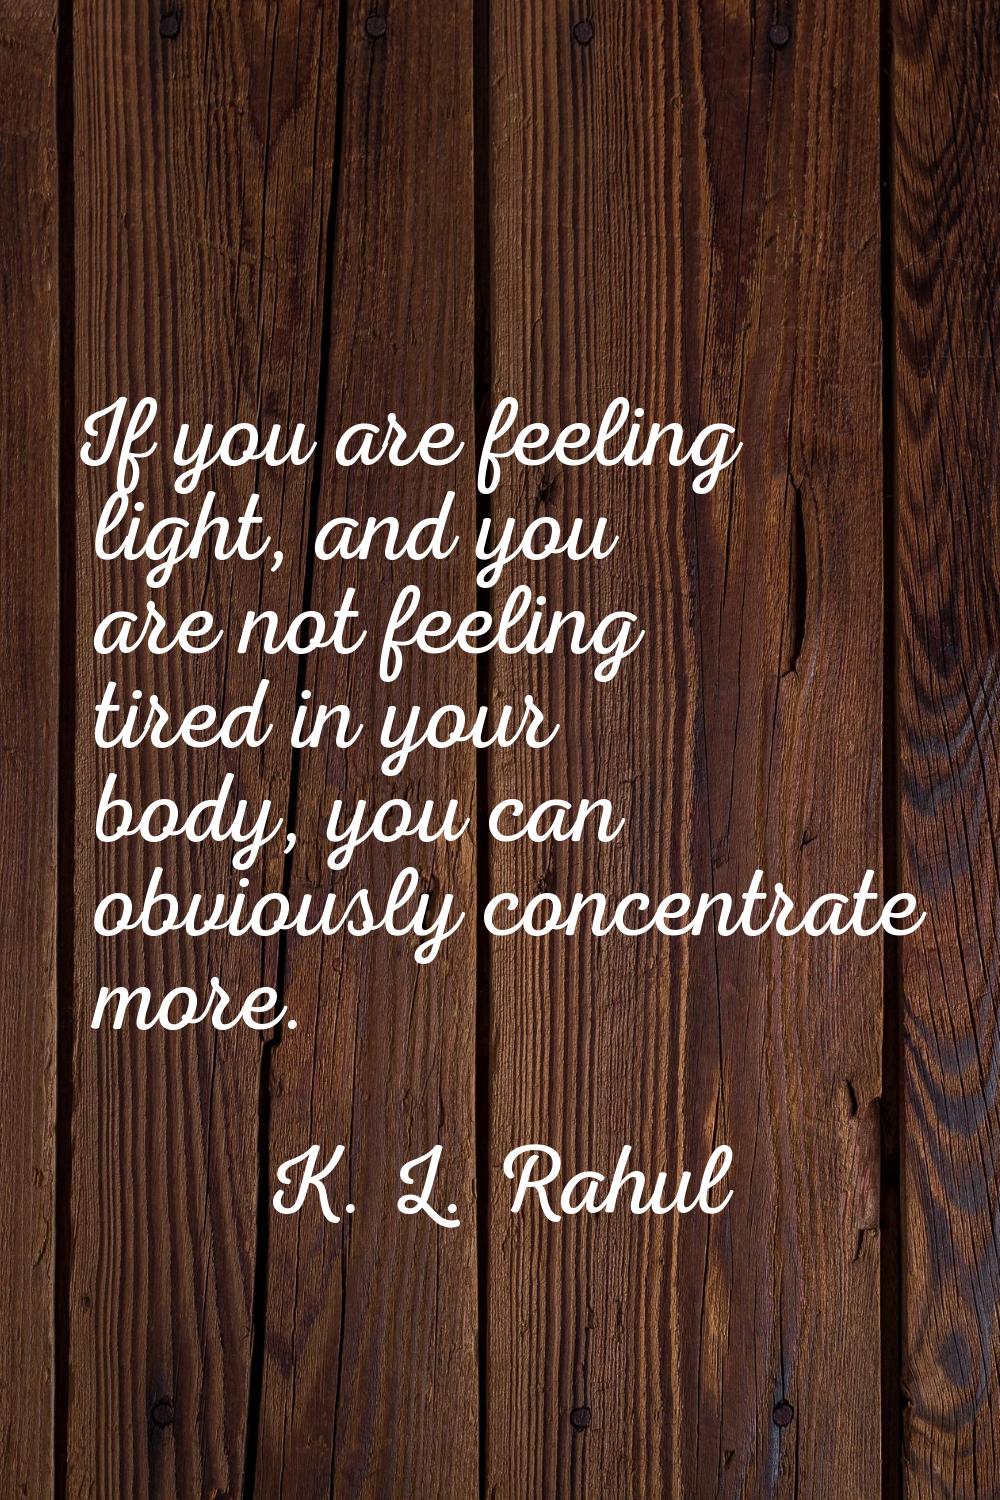 If you are feeling light, and you are not feeling tired in your body, you can obviously concentrate